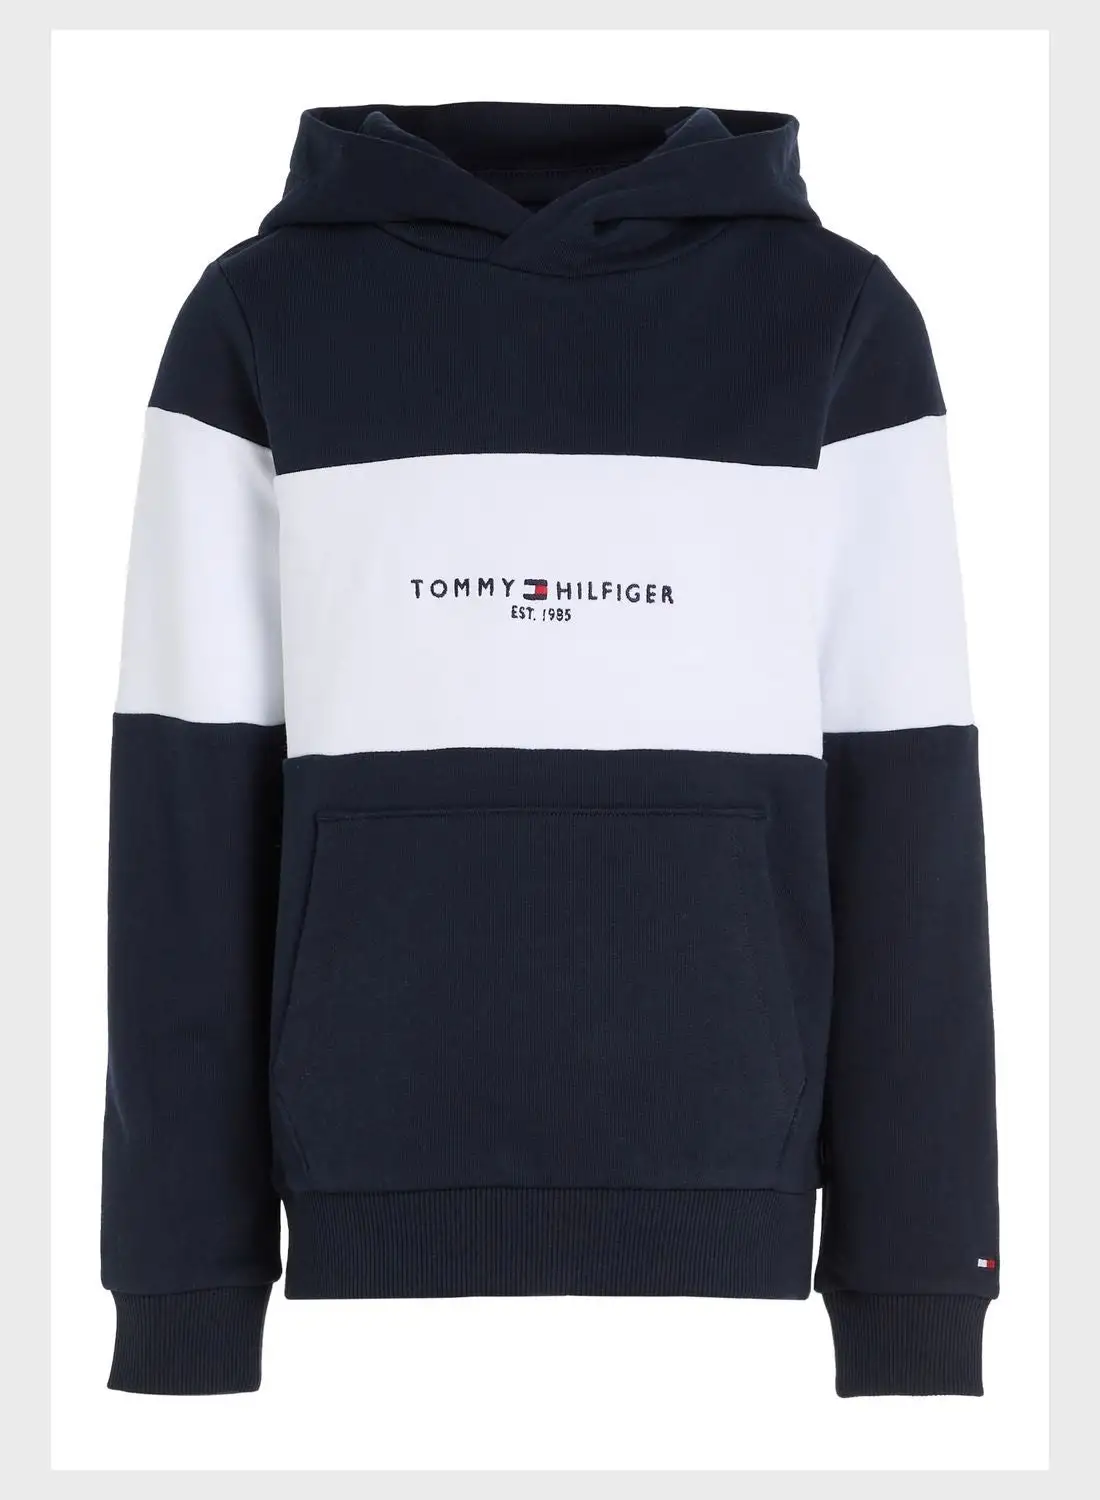 TOMMY HILFIGER Youth Essential Colorblock Hoodie